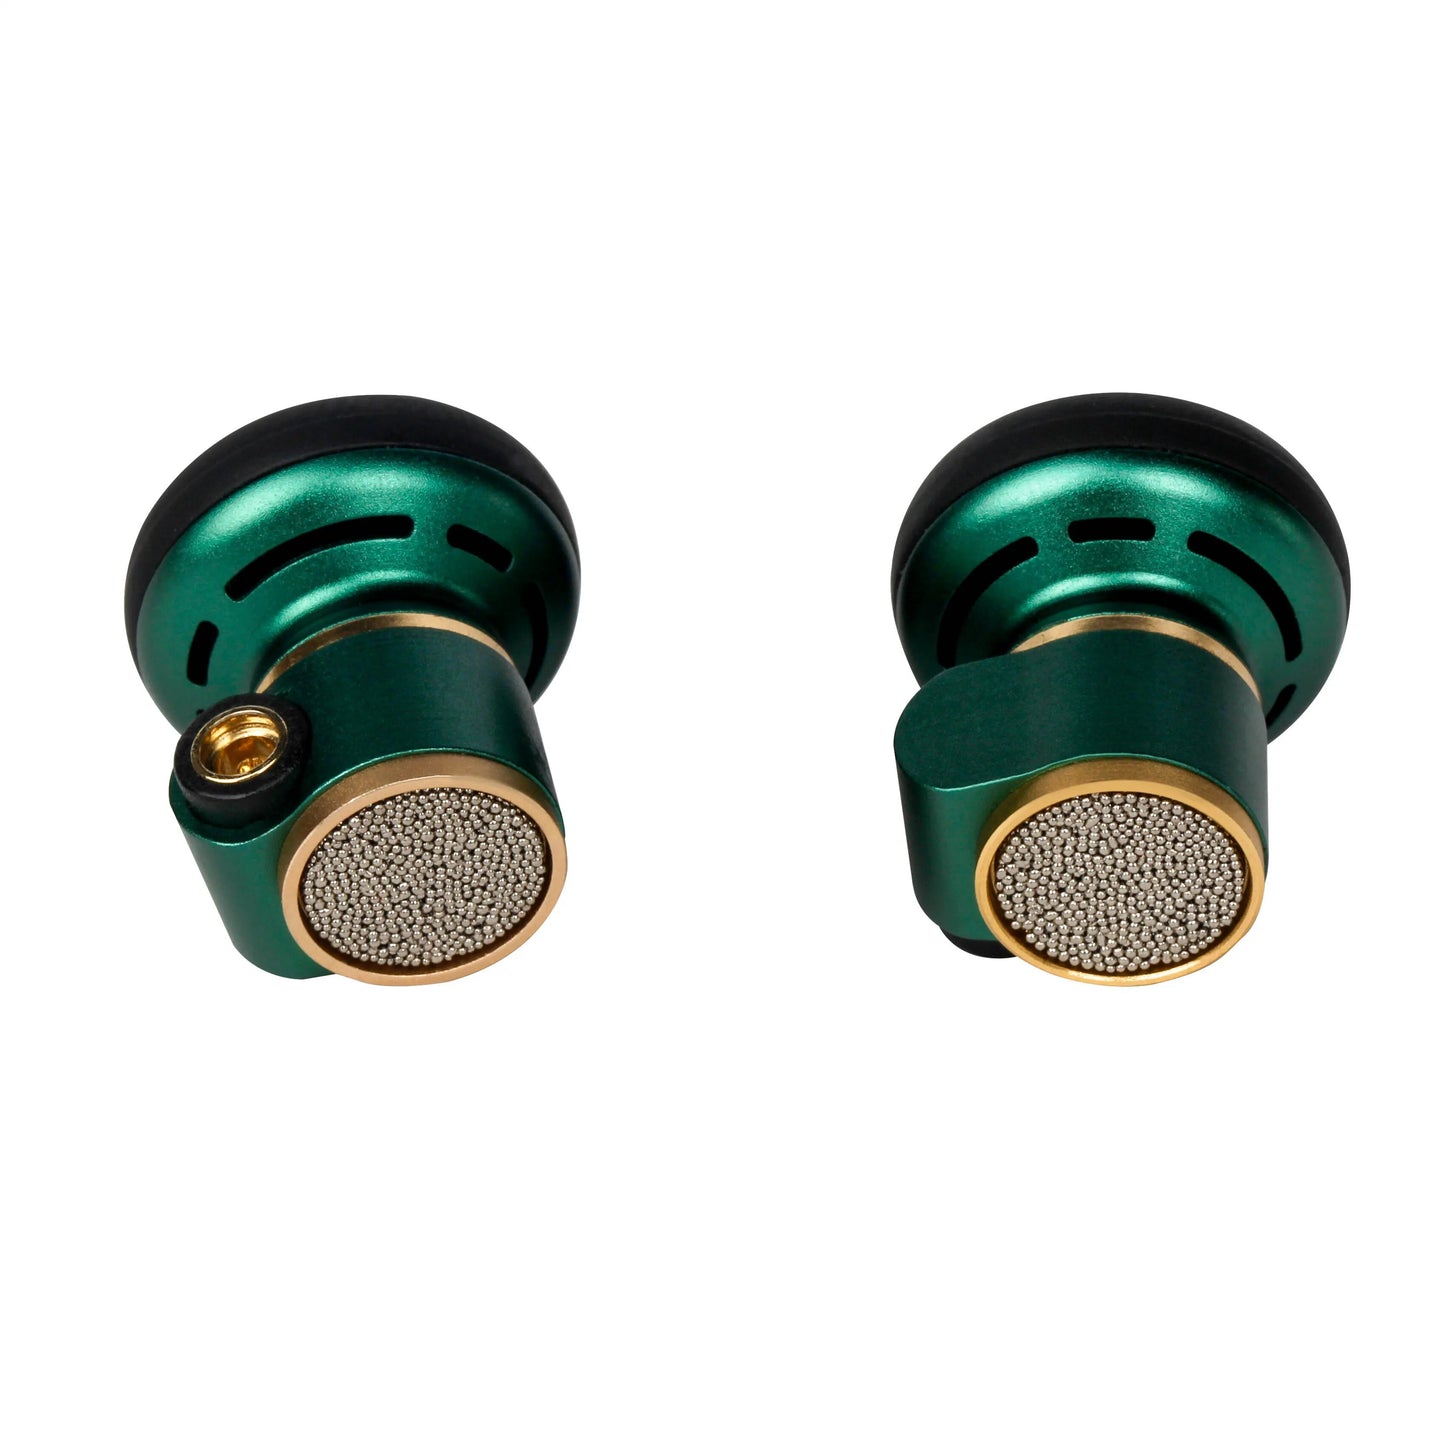 Astrotec Lyra Nature Limited Edition MMCX Detachable Earbuds